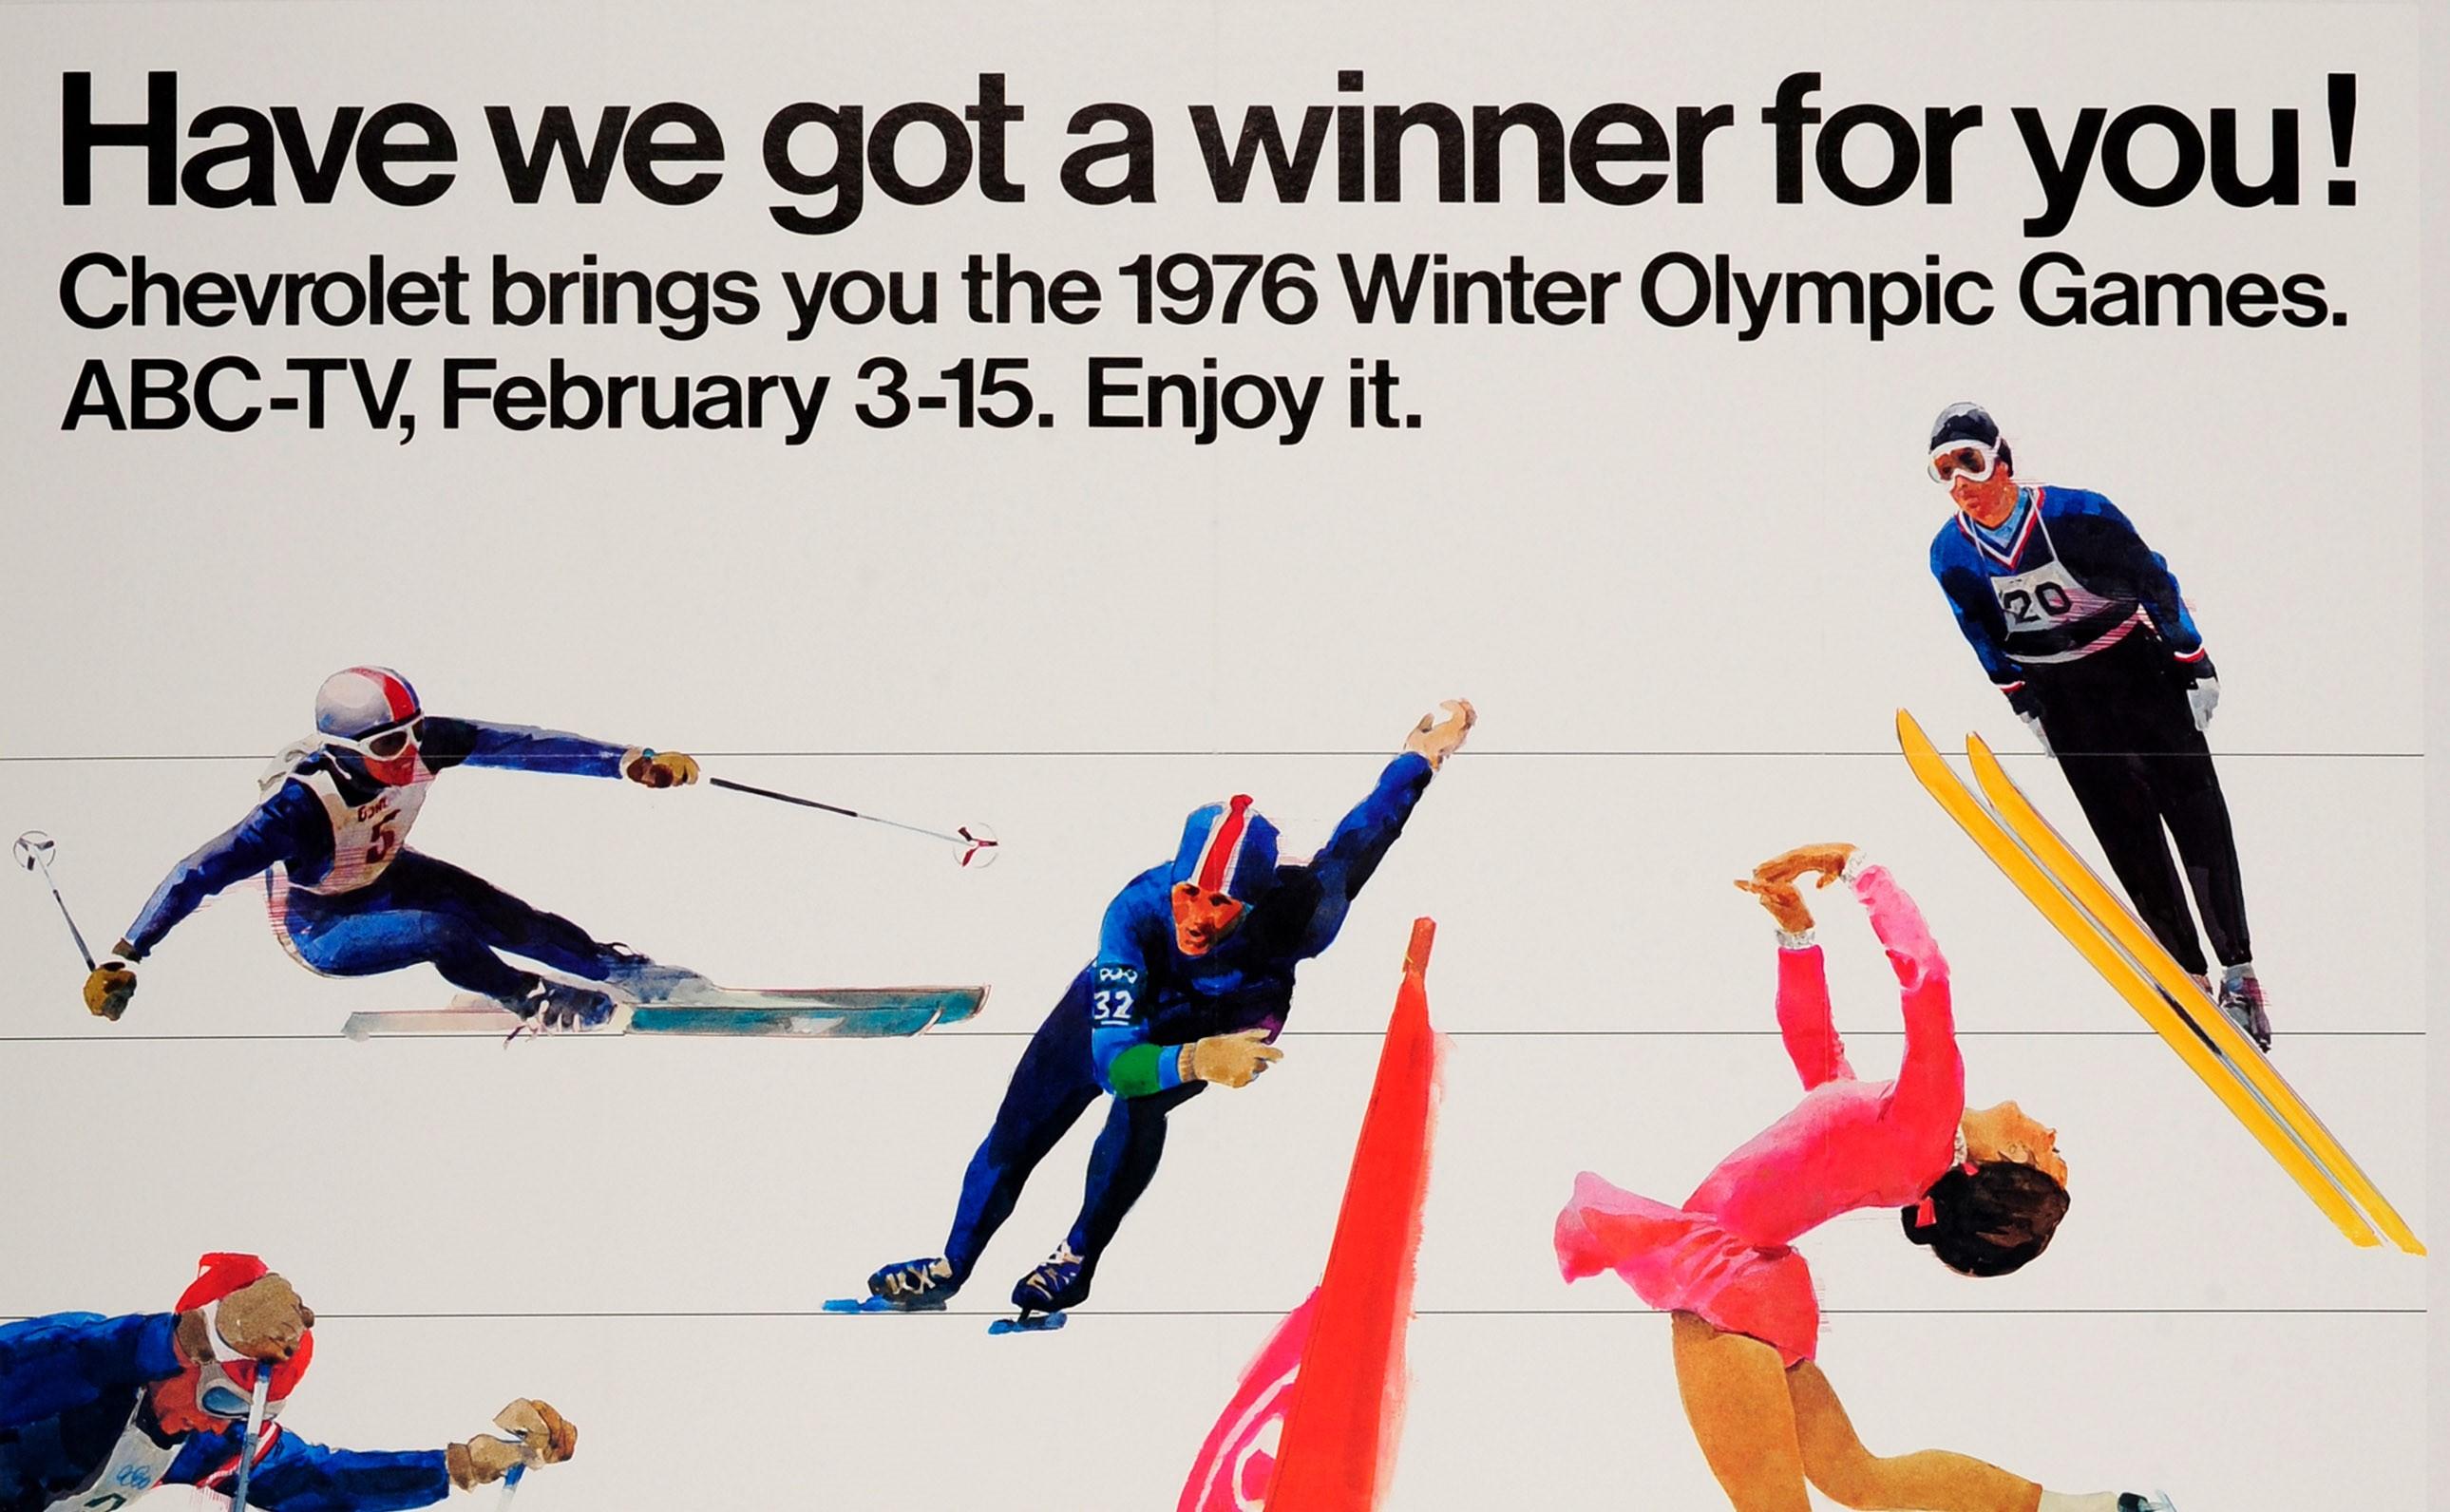 Original vintage sport advertising poster for the 1976 Olympic Games sponsored by Chevrolet featuring dynamic illustrations of the American team competing in various Olympic winter sports including cross country skiing, downhill skiing and slalom,